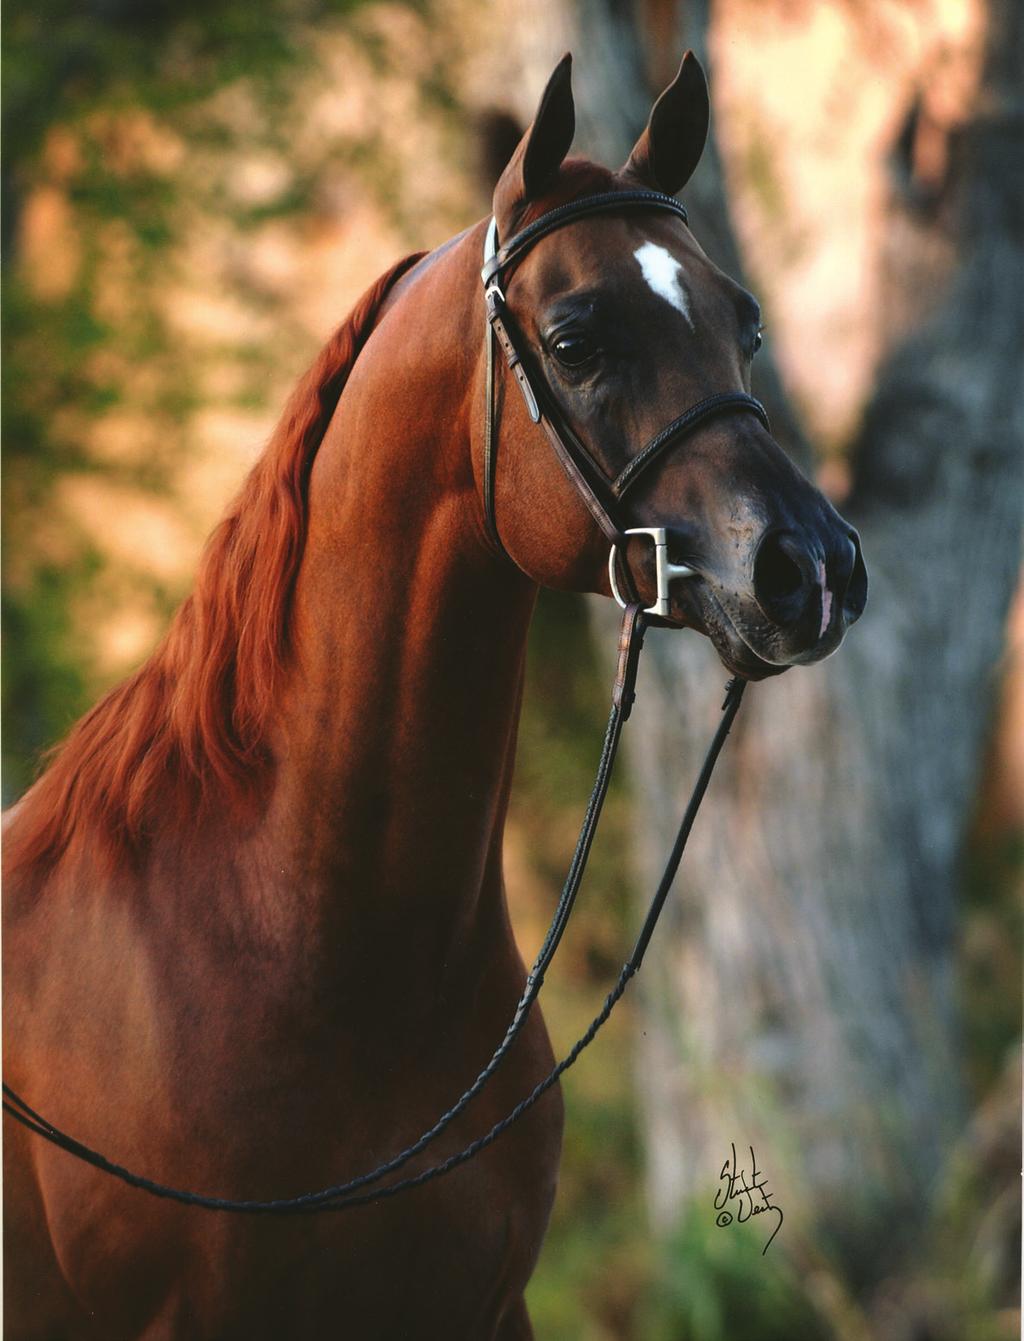 The Arabian horse gets its Arabic name, Kohl-ani, from its beautiful skin and eyes.